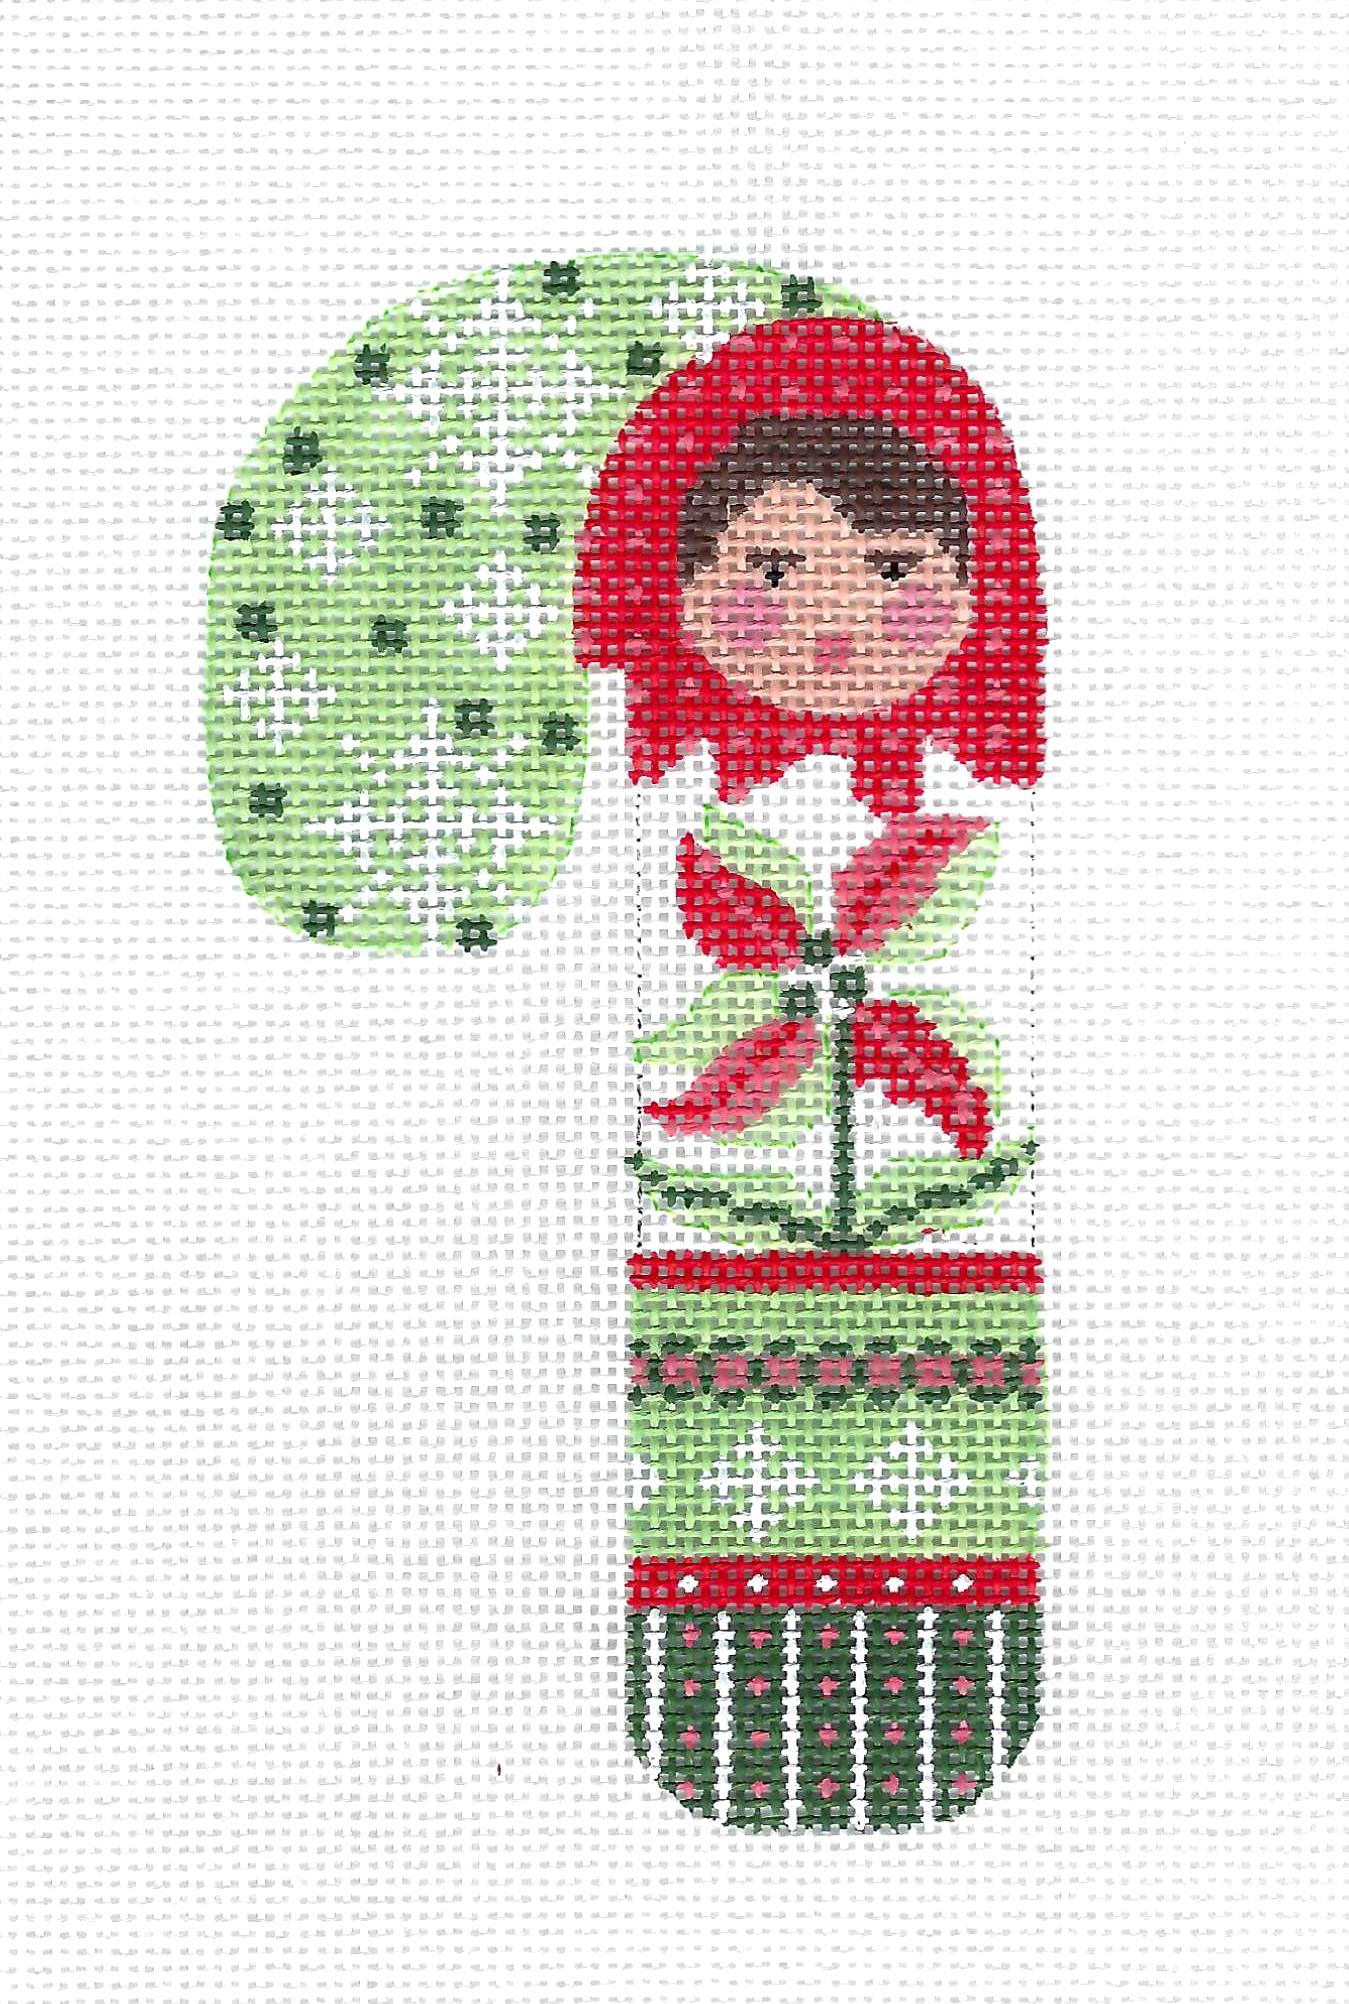 Medium Candy Cane ~ Russian Doll Med. Candy Cane  handpainted Needlepoint Canvas by WTP  from Danji